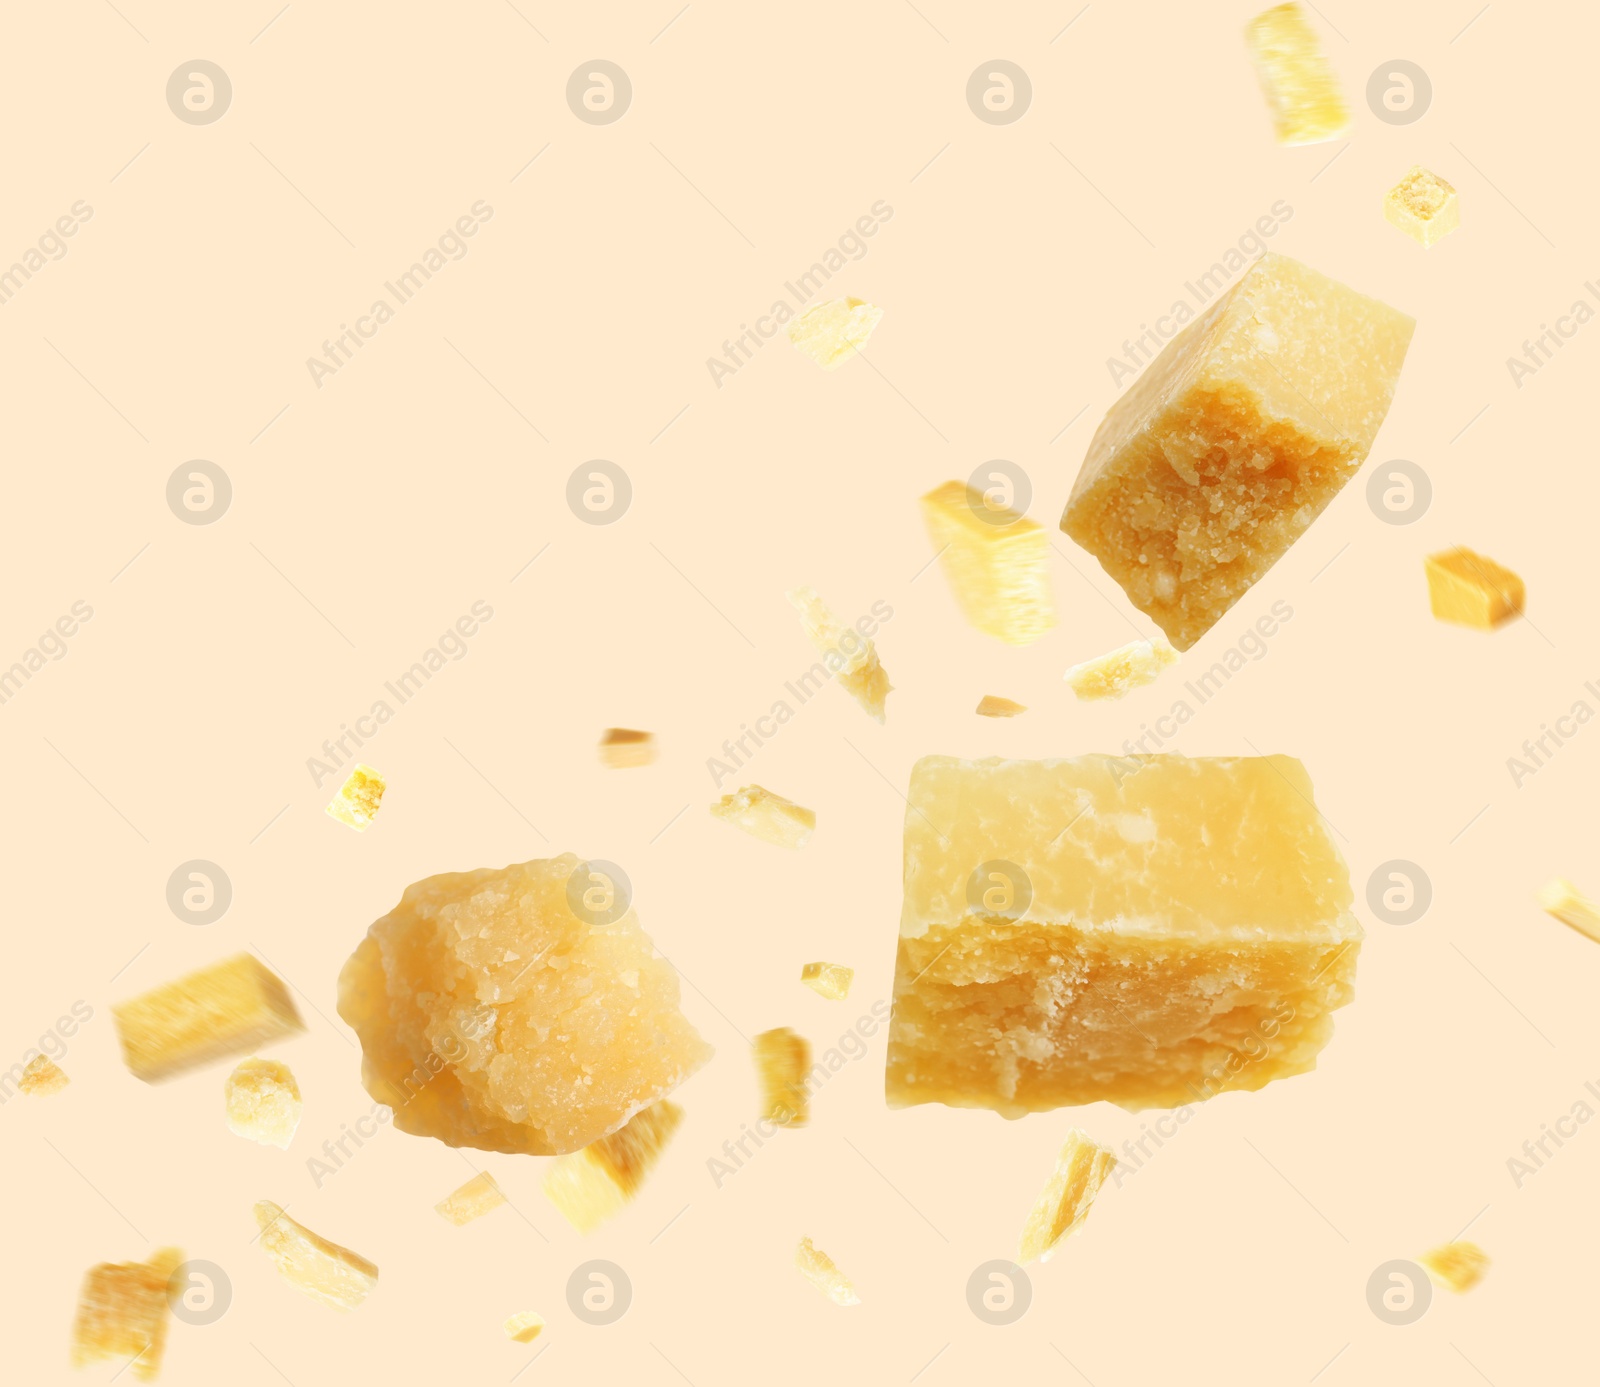 Image of Pieces of delicious parmesan cheese flying on beige background